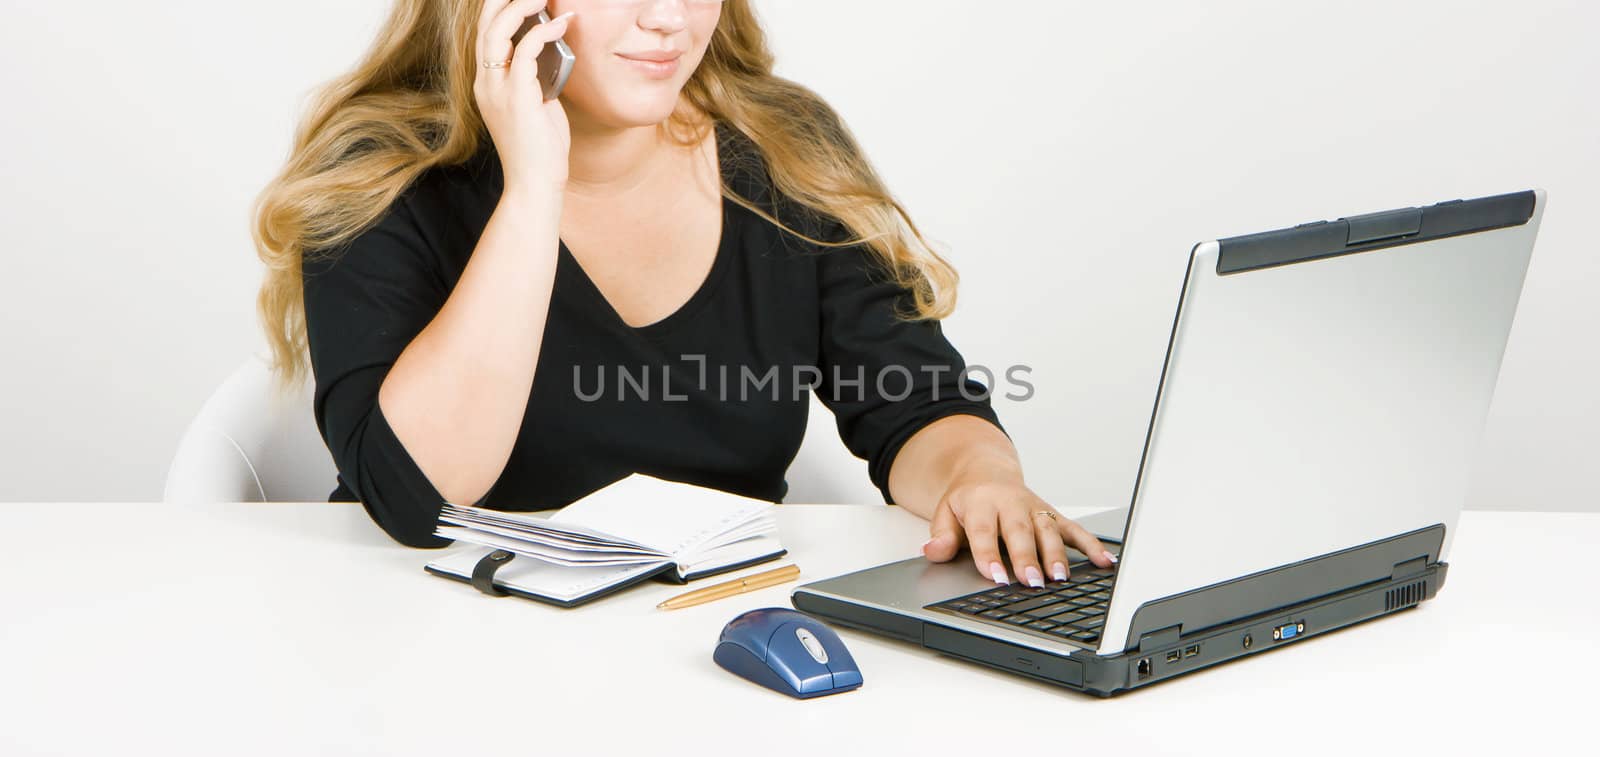 blonde in office with a laptop says on his cell phone
